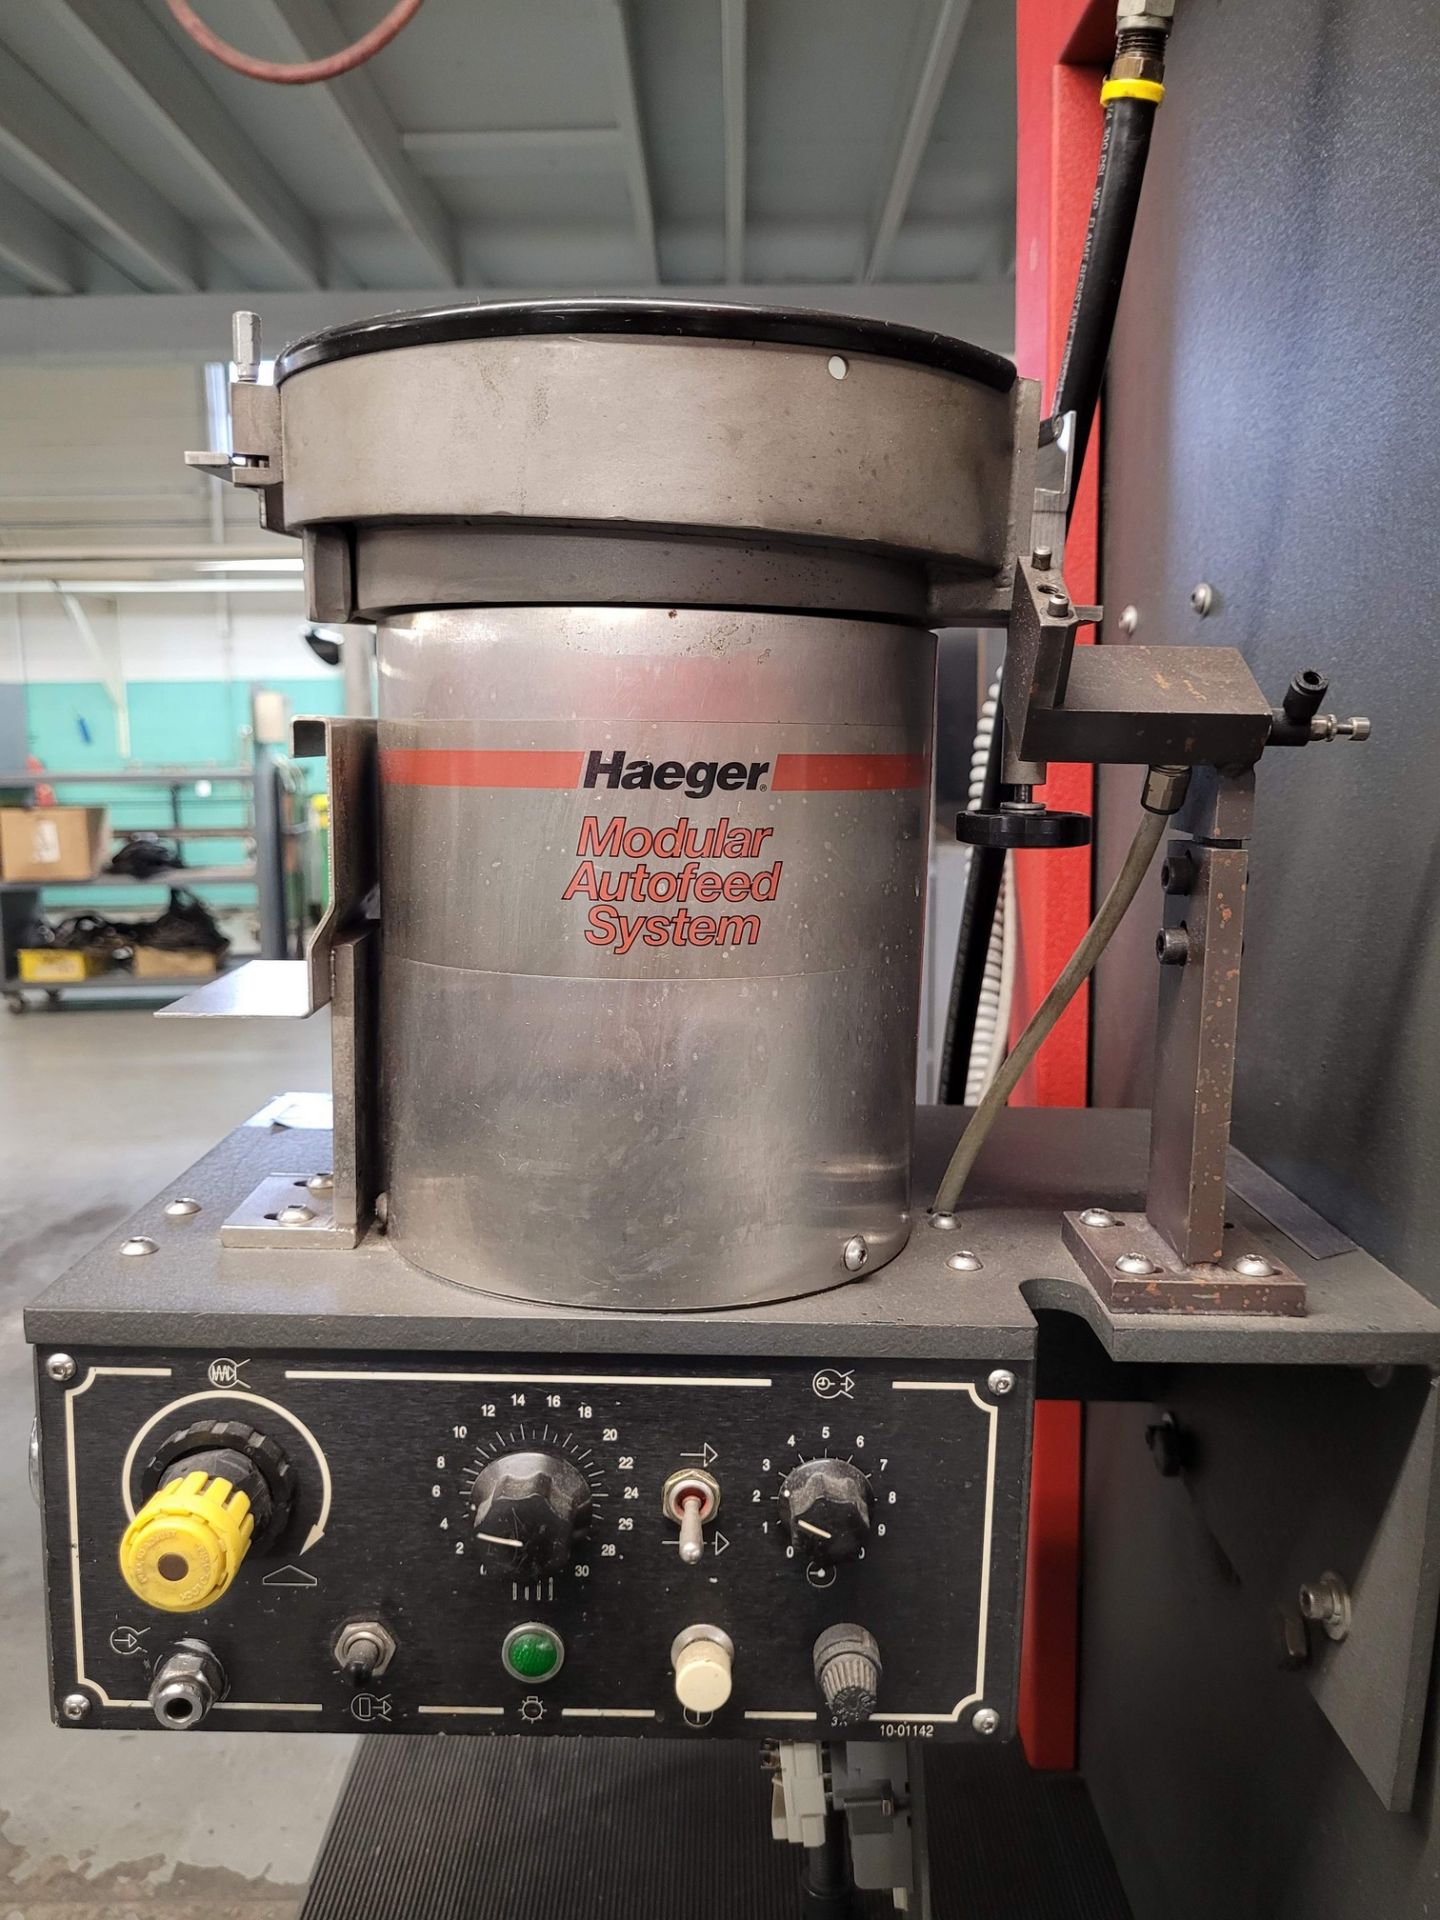 HAEGER 618-1H HYDRAULIC INSERTION PRESS, S/N - 06H00925 W/ HAEGER MODULAR AUTOFEED SYSTEM (RIGGING - Image 9 of 11